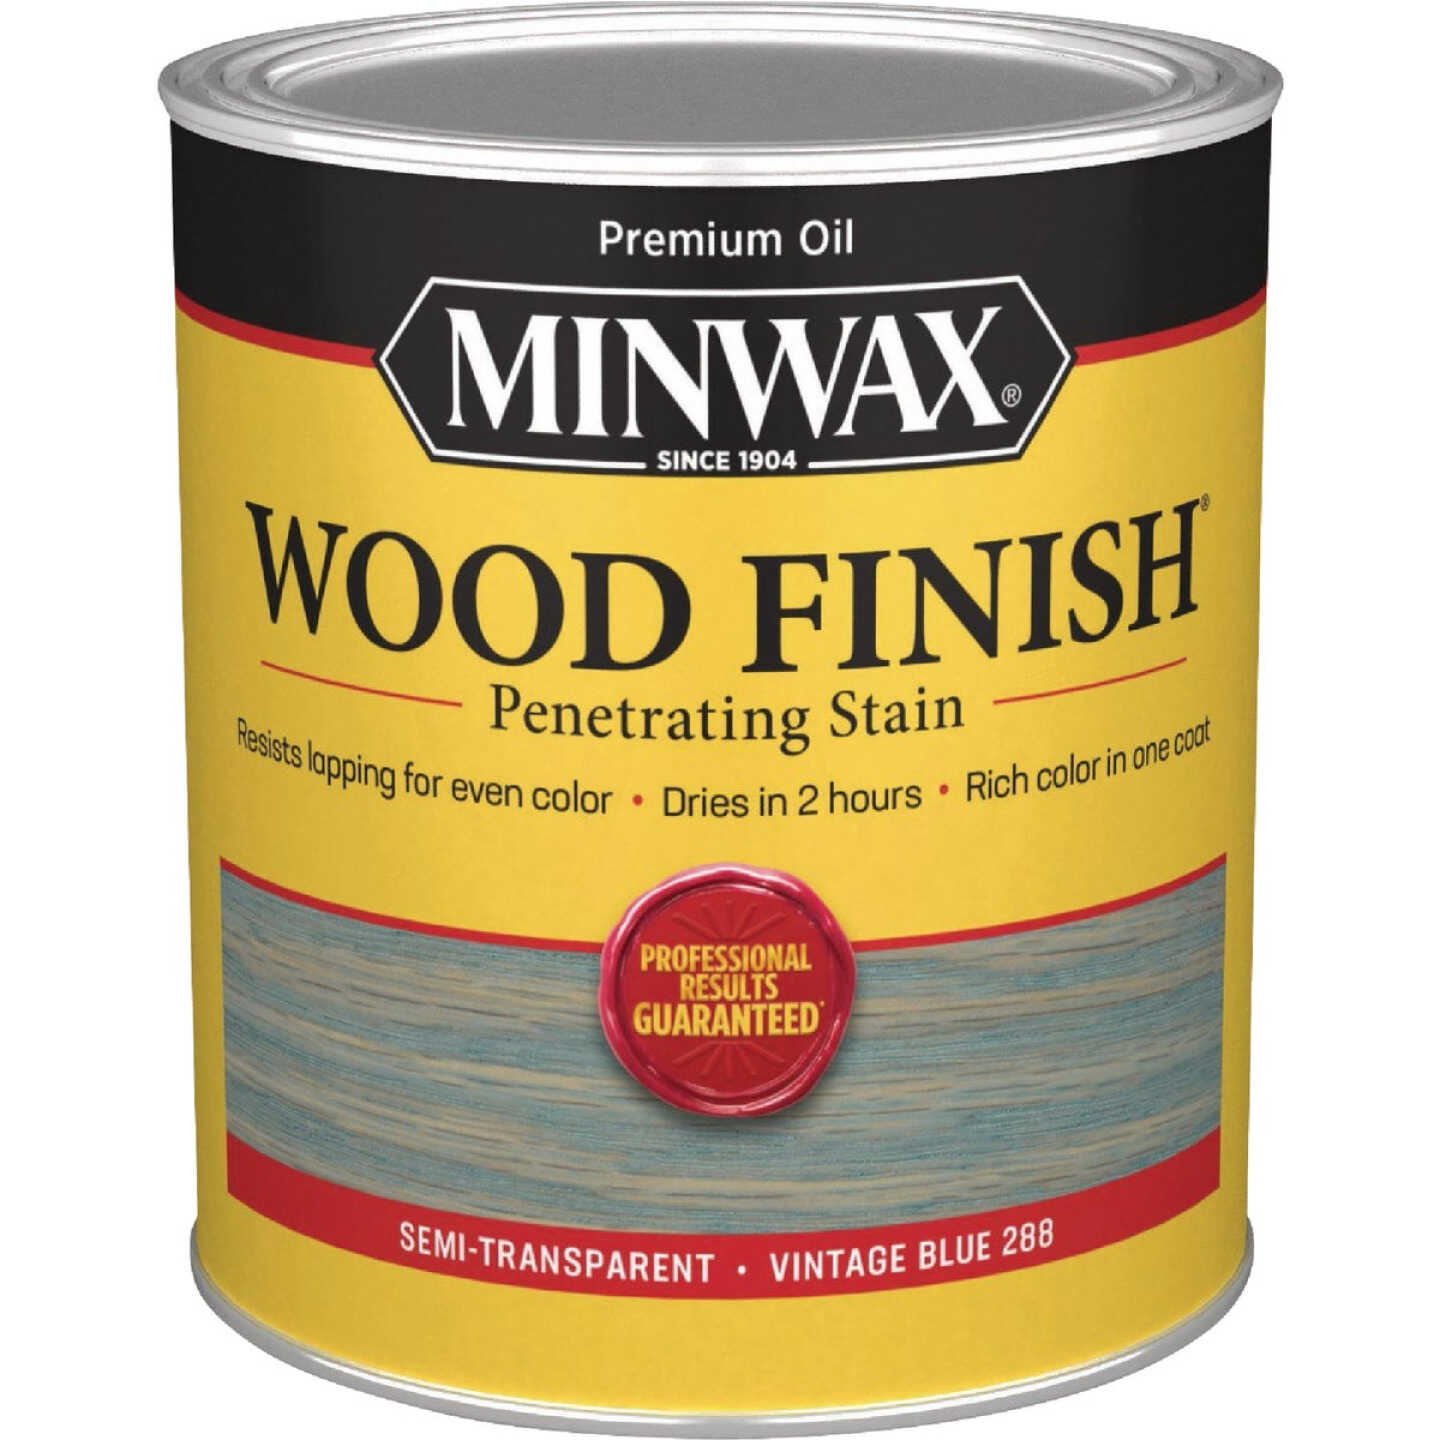 Authentic Vintage Distressed Finish with Minwax Stain